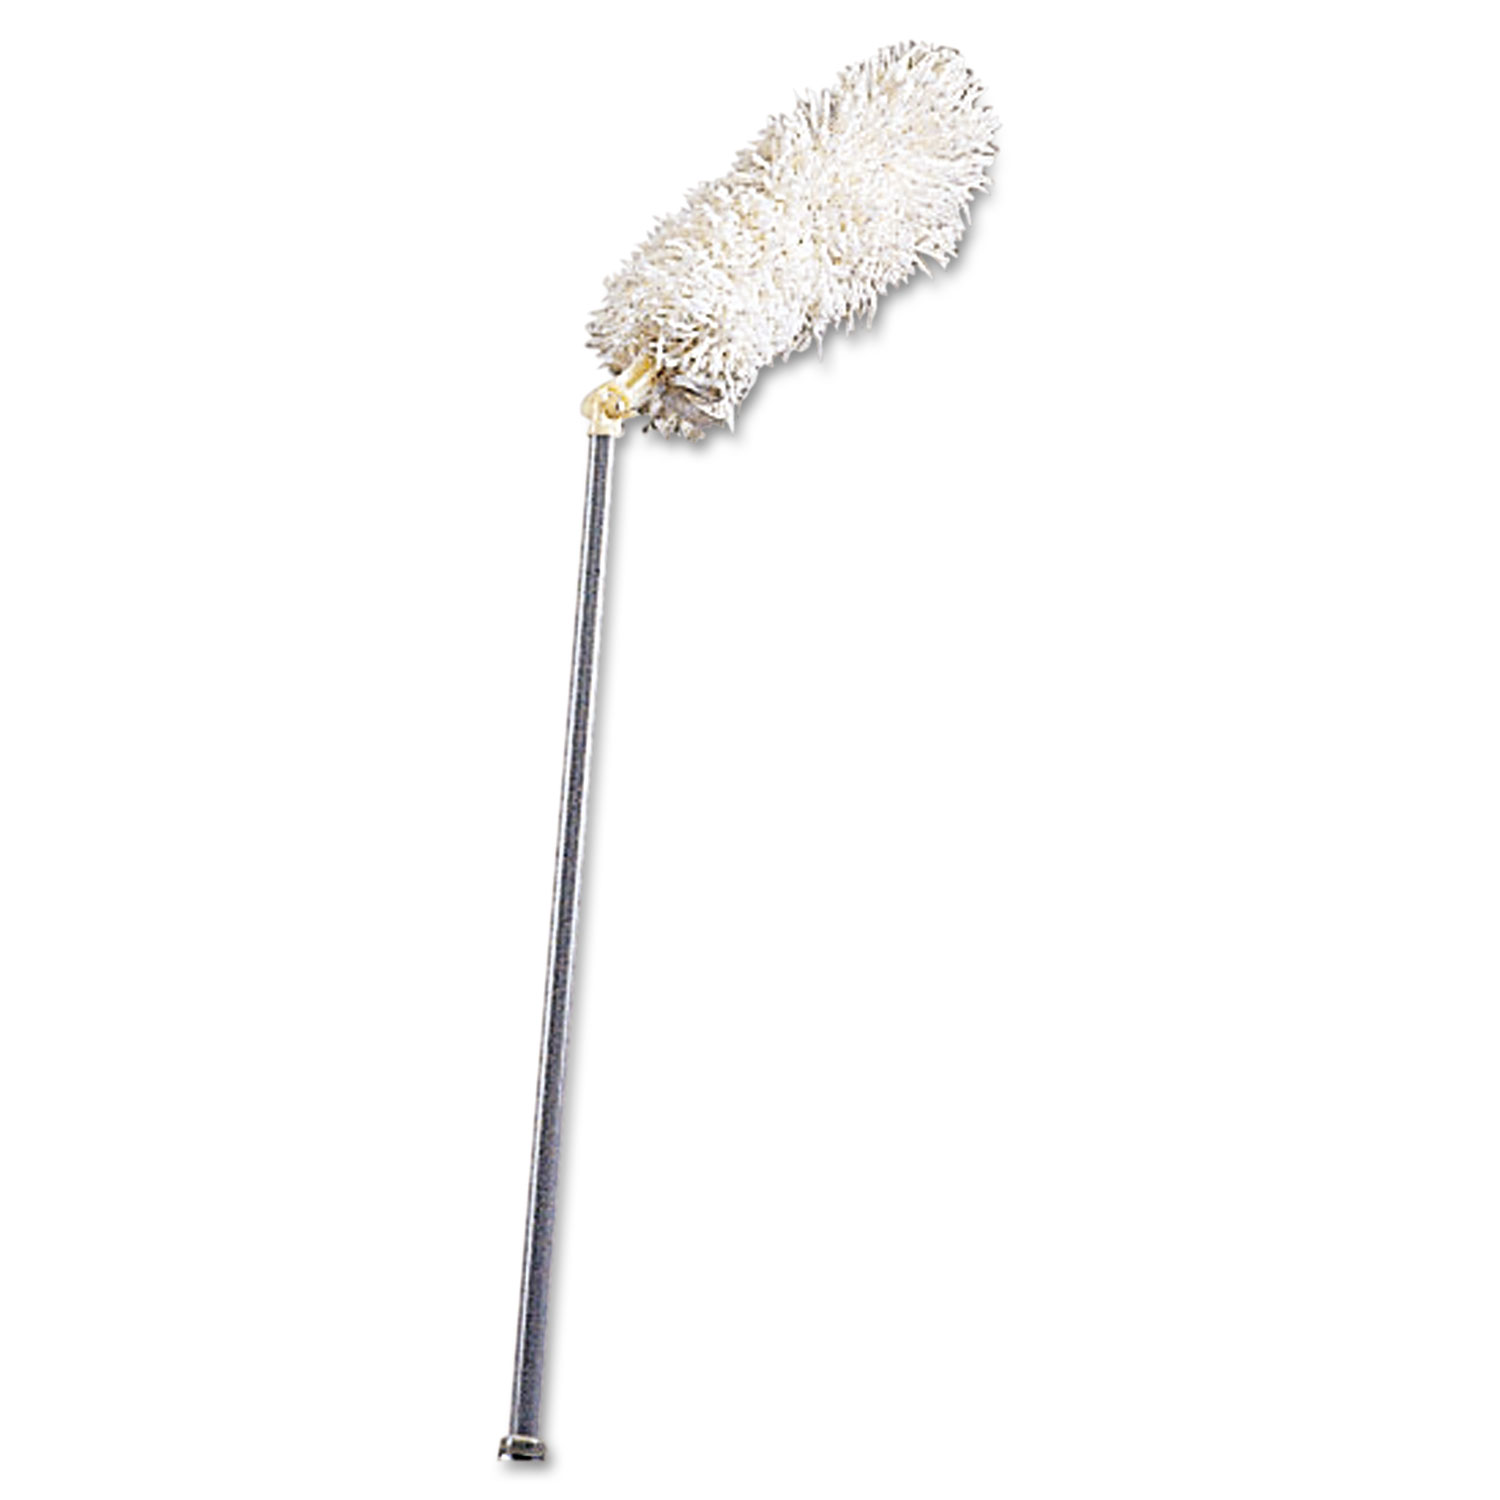 HiDuster Dusting Tool with Angled Lauderable Head, 51